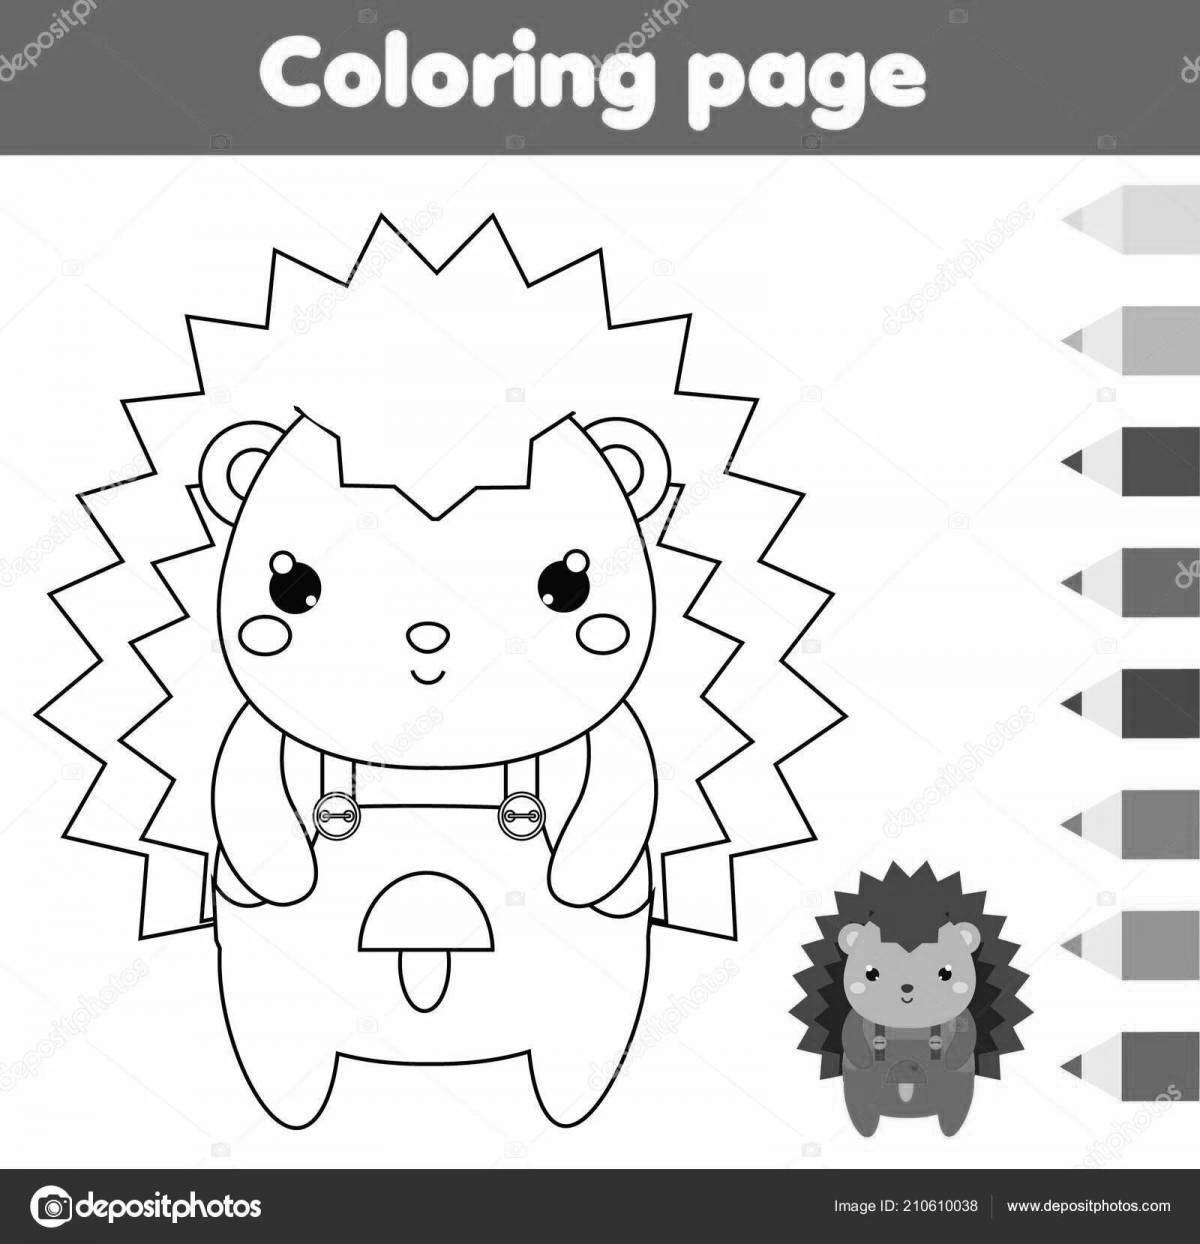 Exquisite hedgehog coloring by numbers